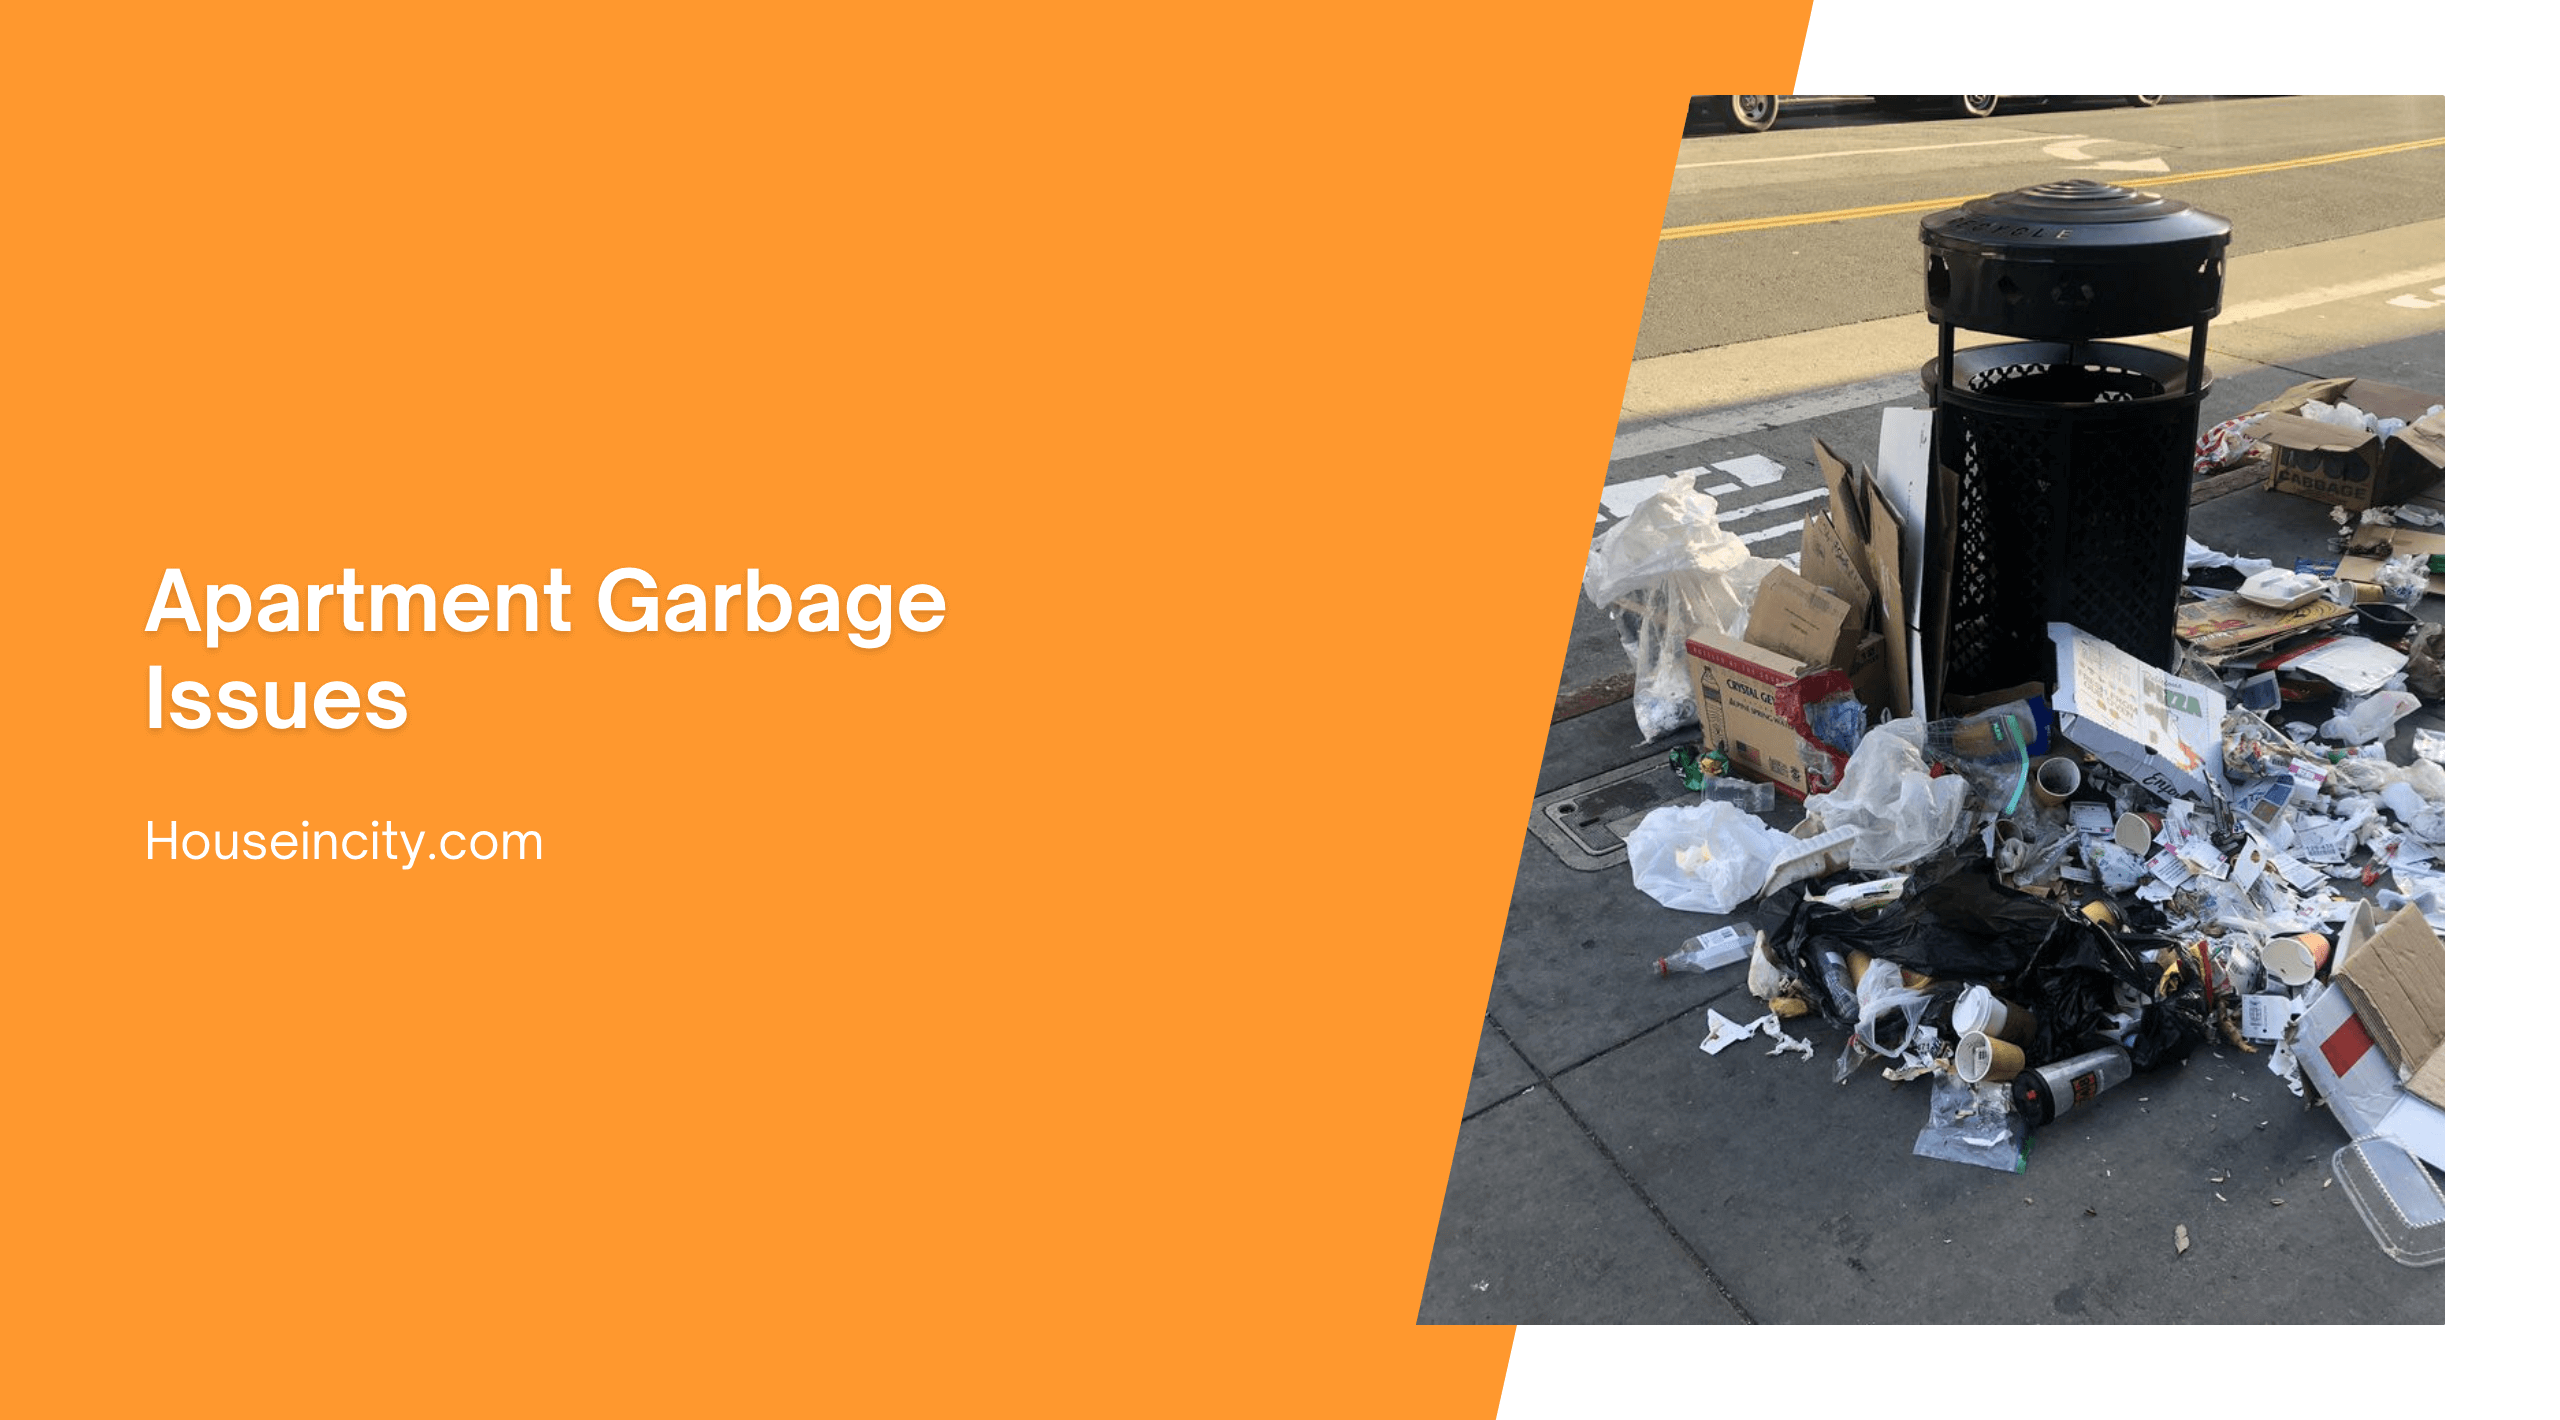 Apartment Garbage Issues